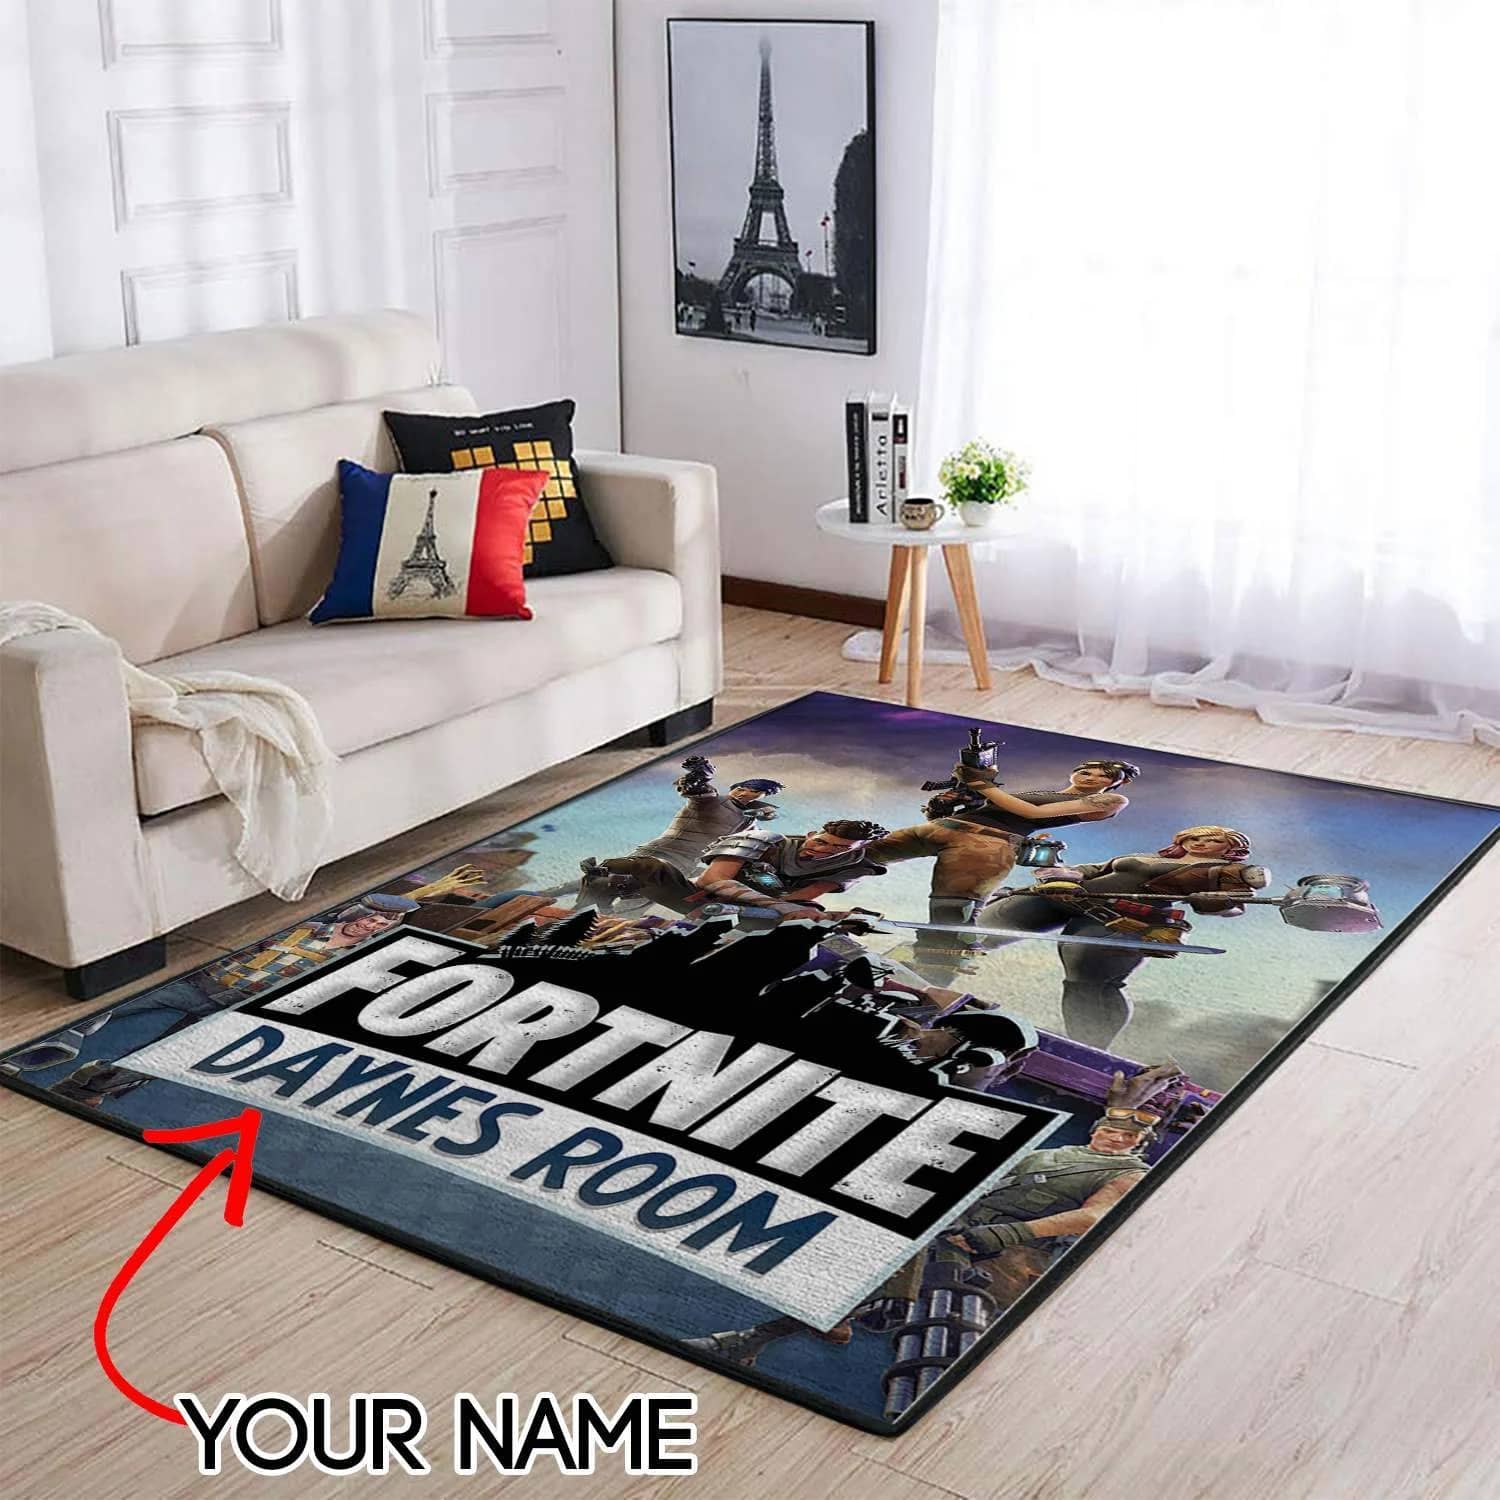 Customized Name Fortnite Area Limited Edition Amazon Best Seller Sku 264956 Rug